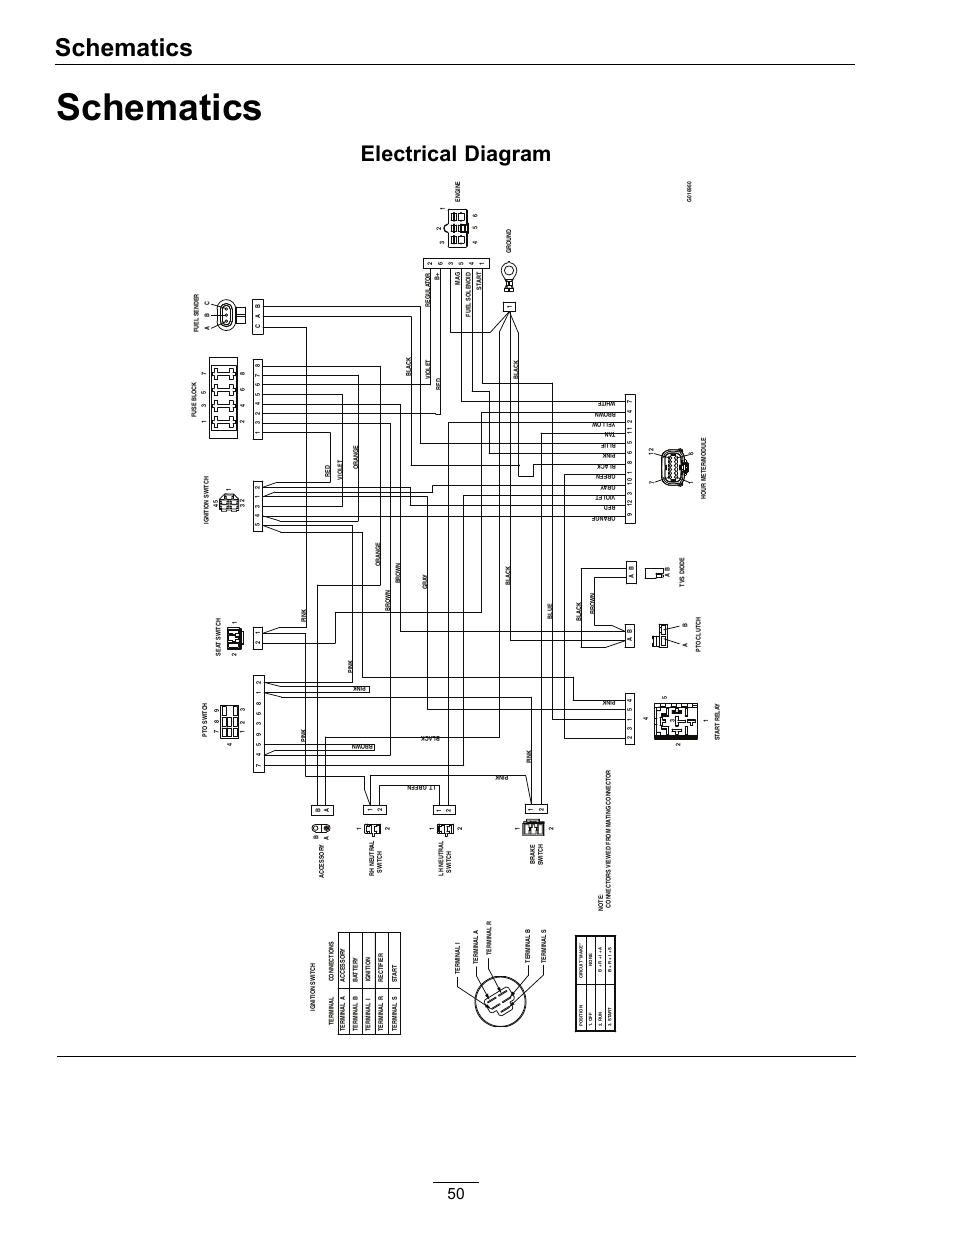 1989 Ford F150 Ignition Wiring Diagram from diagramweb.net